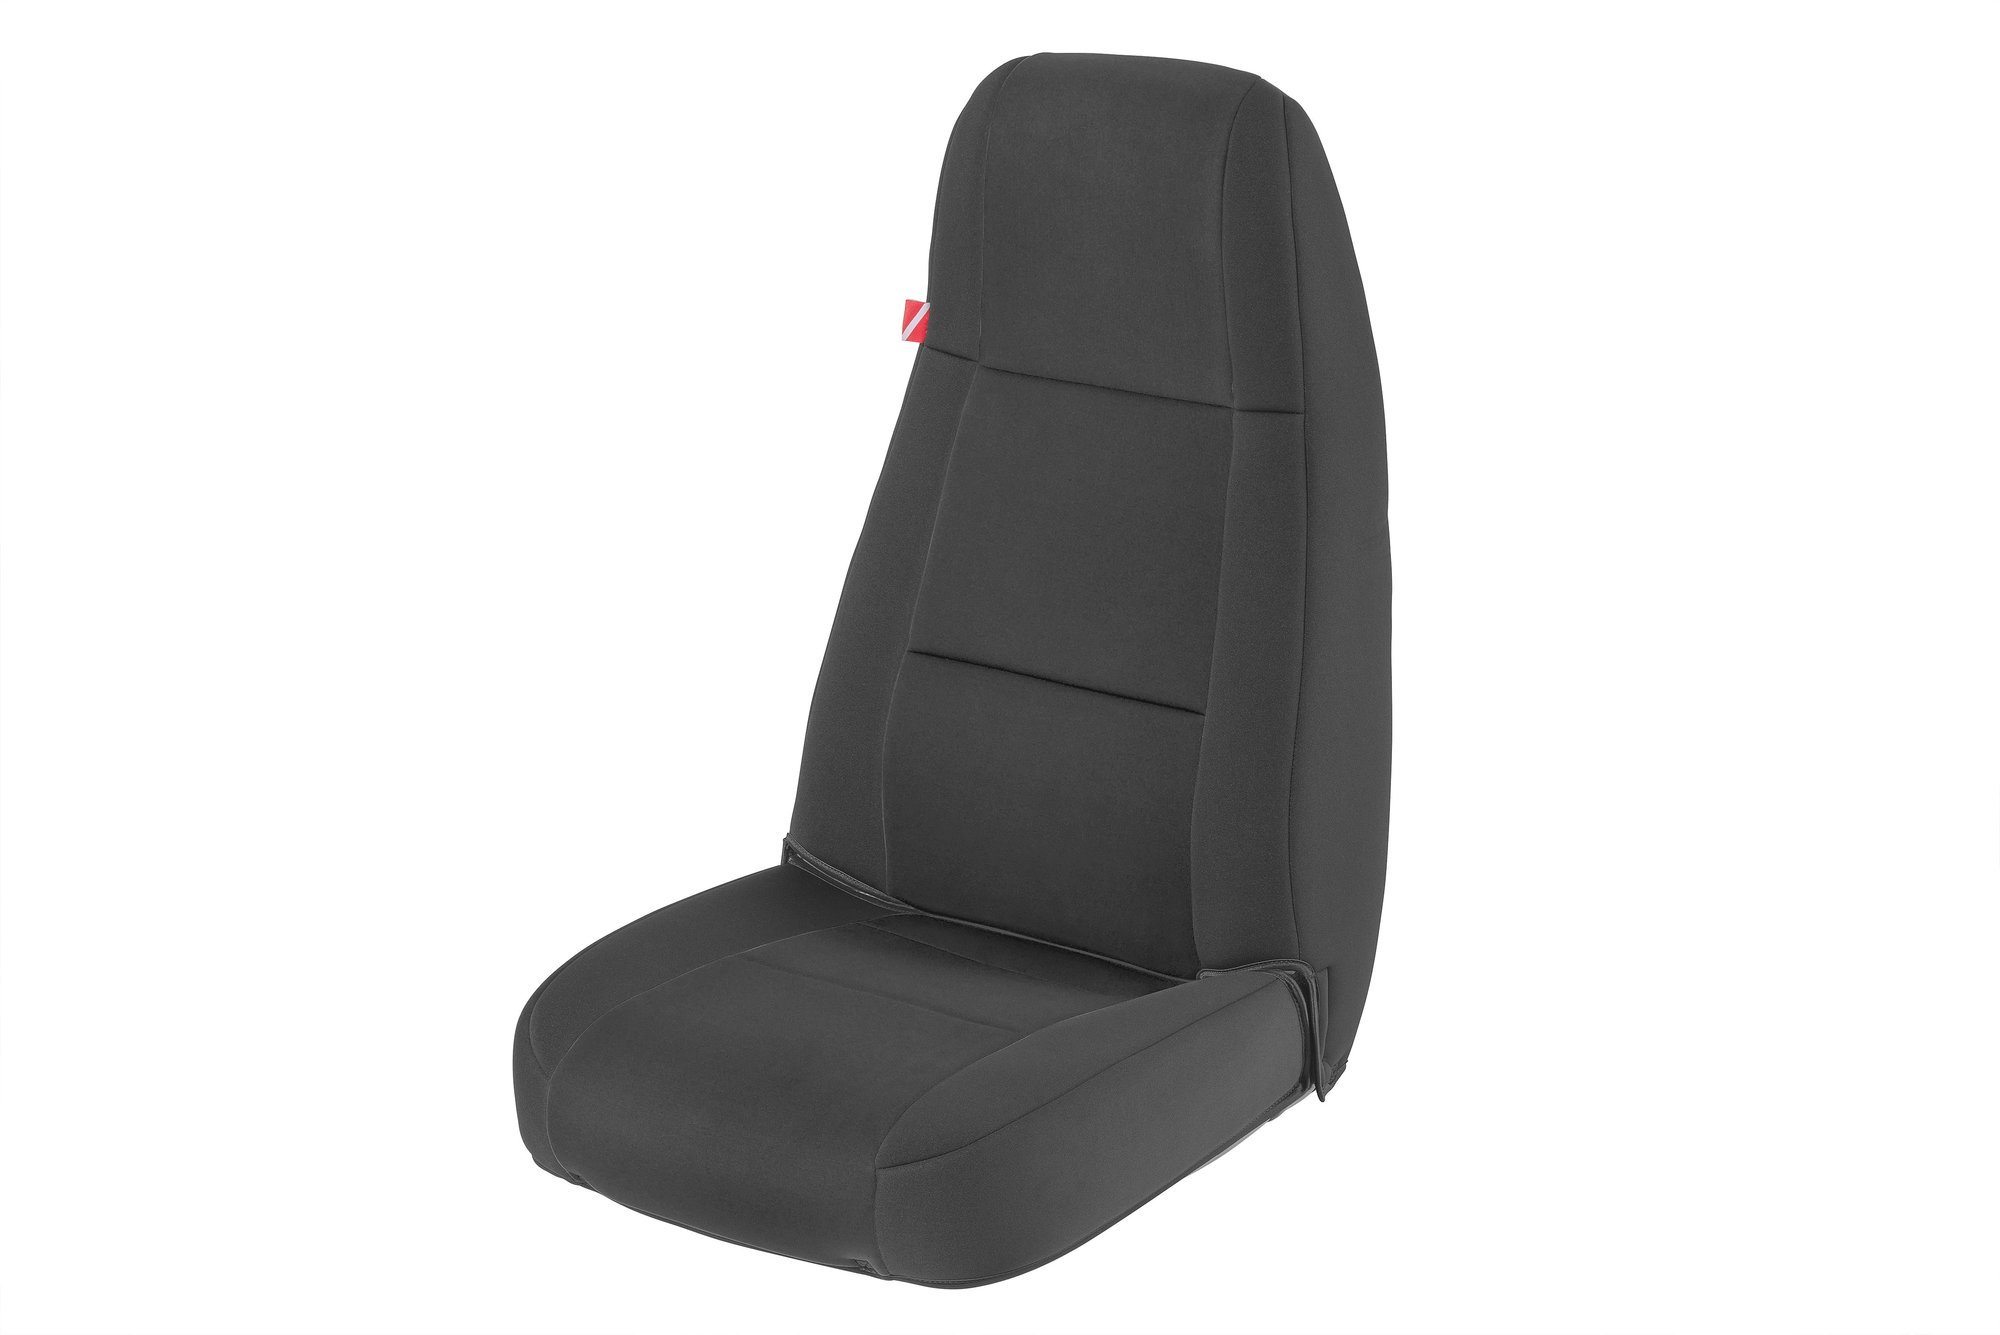 Jeep Wrangler Neoprene Seat Covers for 92-95 Jeep Wrangler YJ Diver Down |  Jeeperz Creeperz